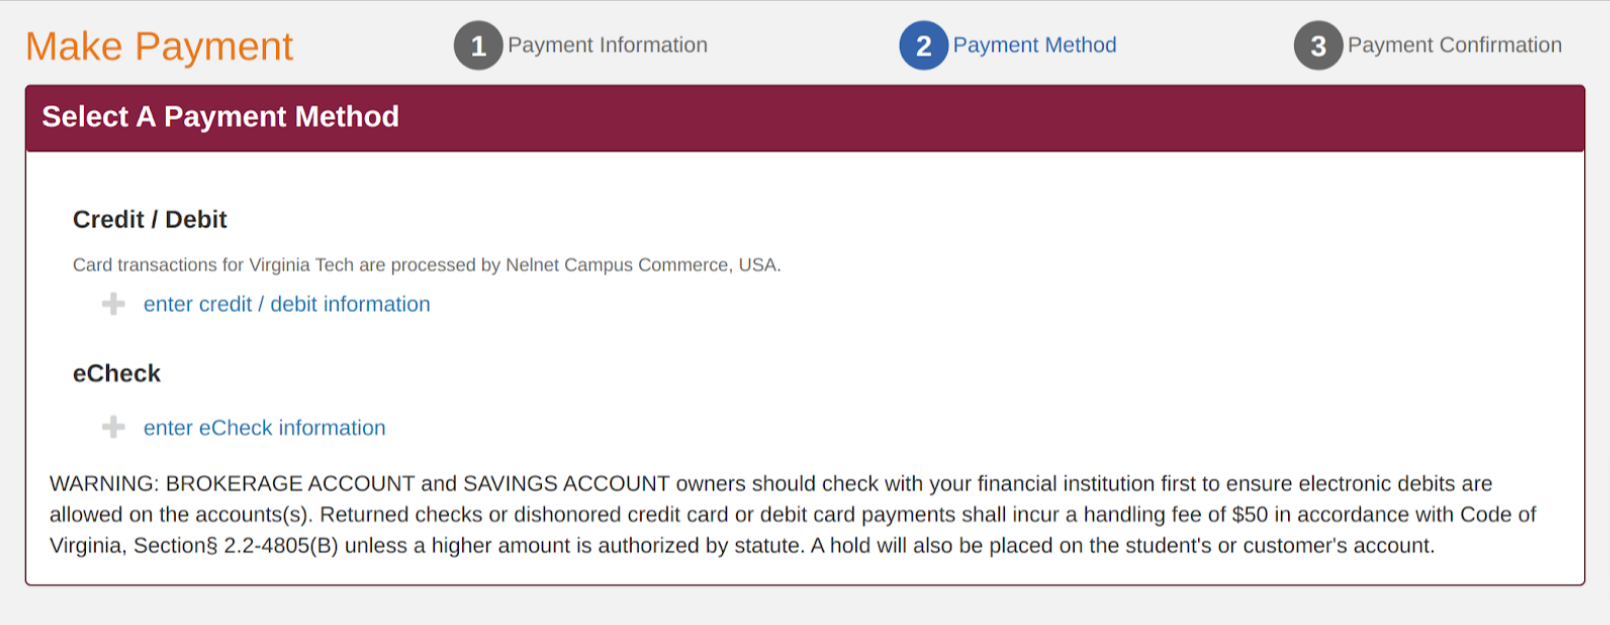 "Select A Payment Method" window that allows the options of paying by Credit/Debit or by eCheck.